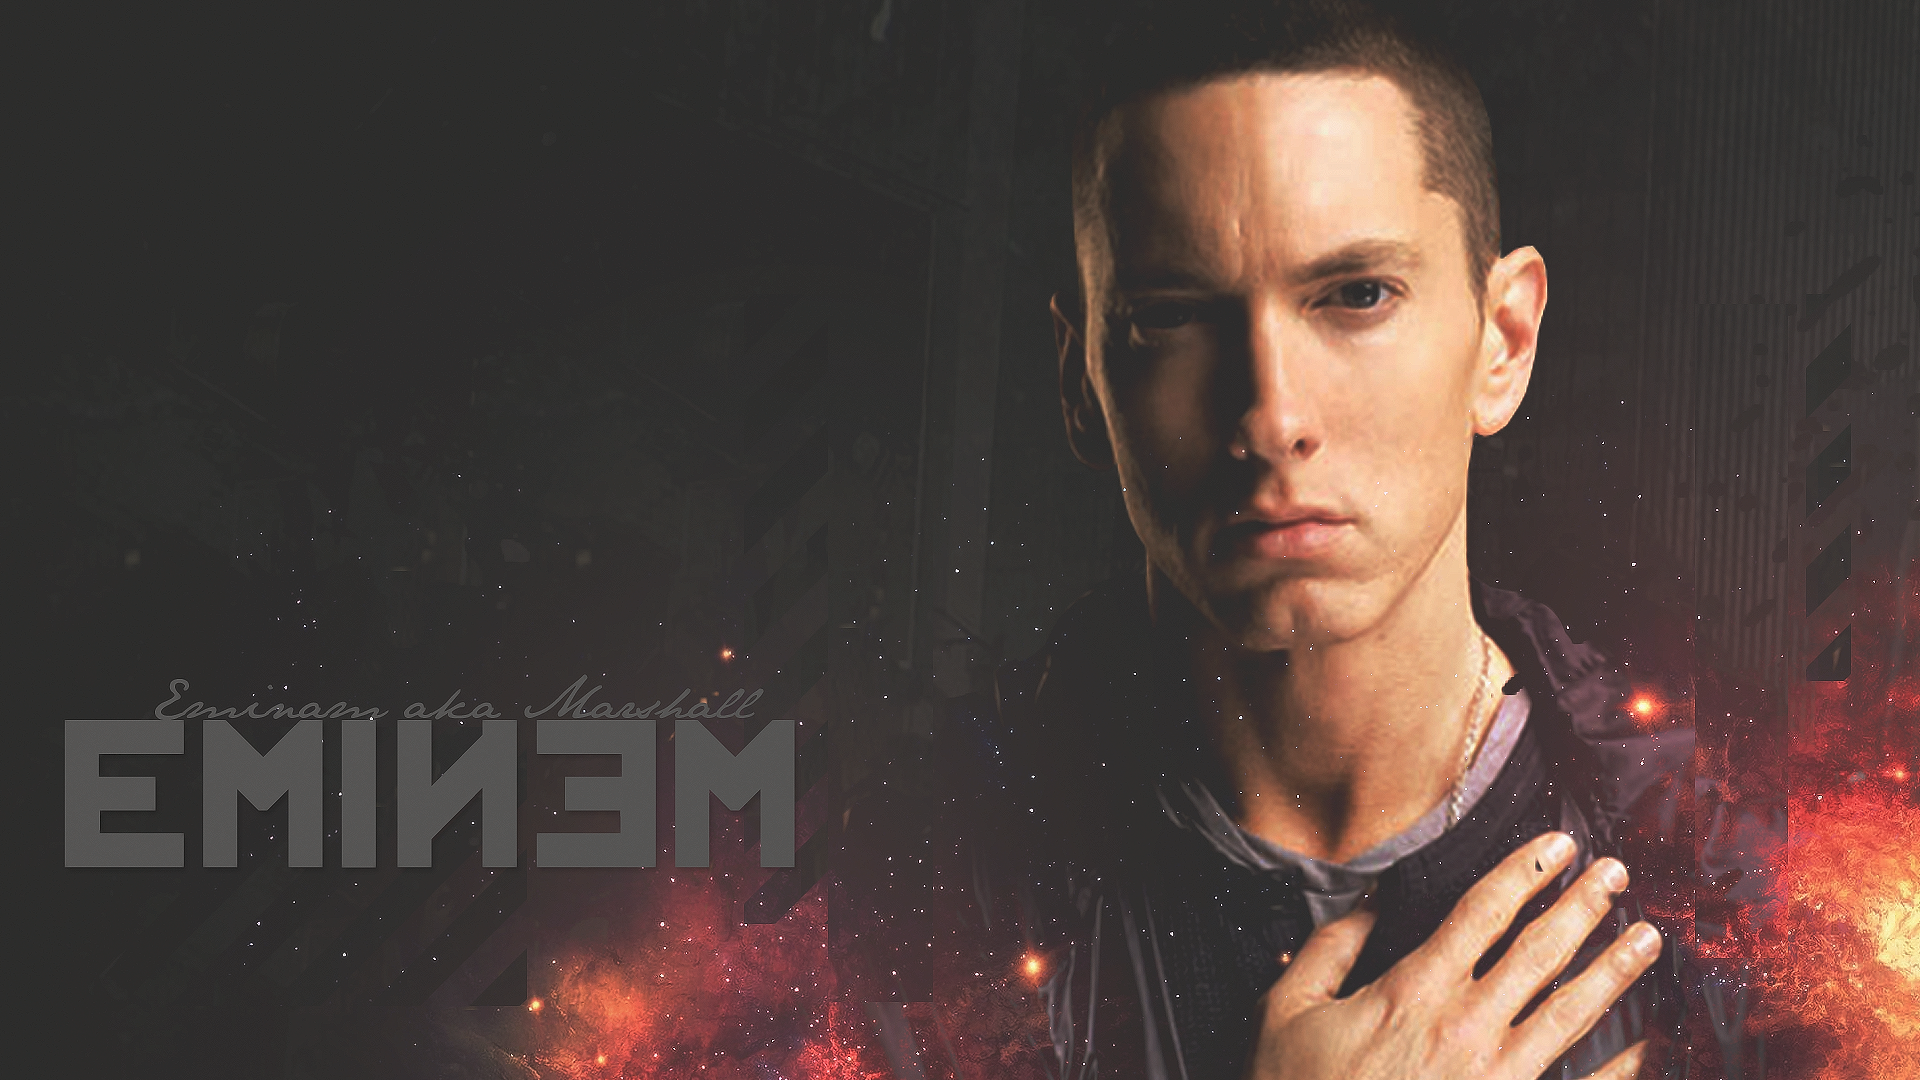 Eminem Wallpaper HD Hq Pictures To